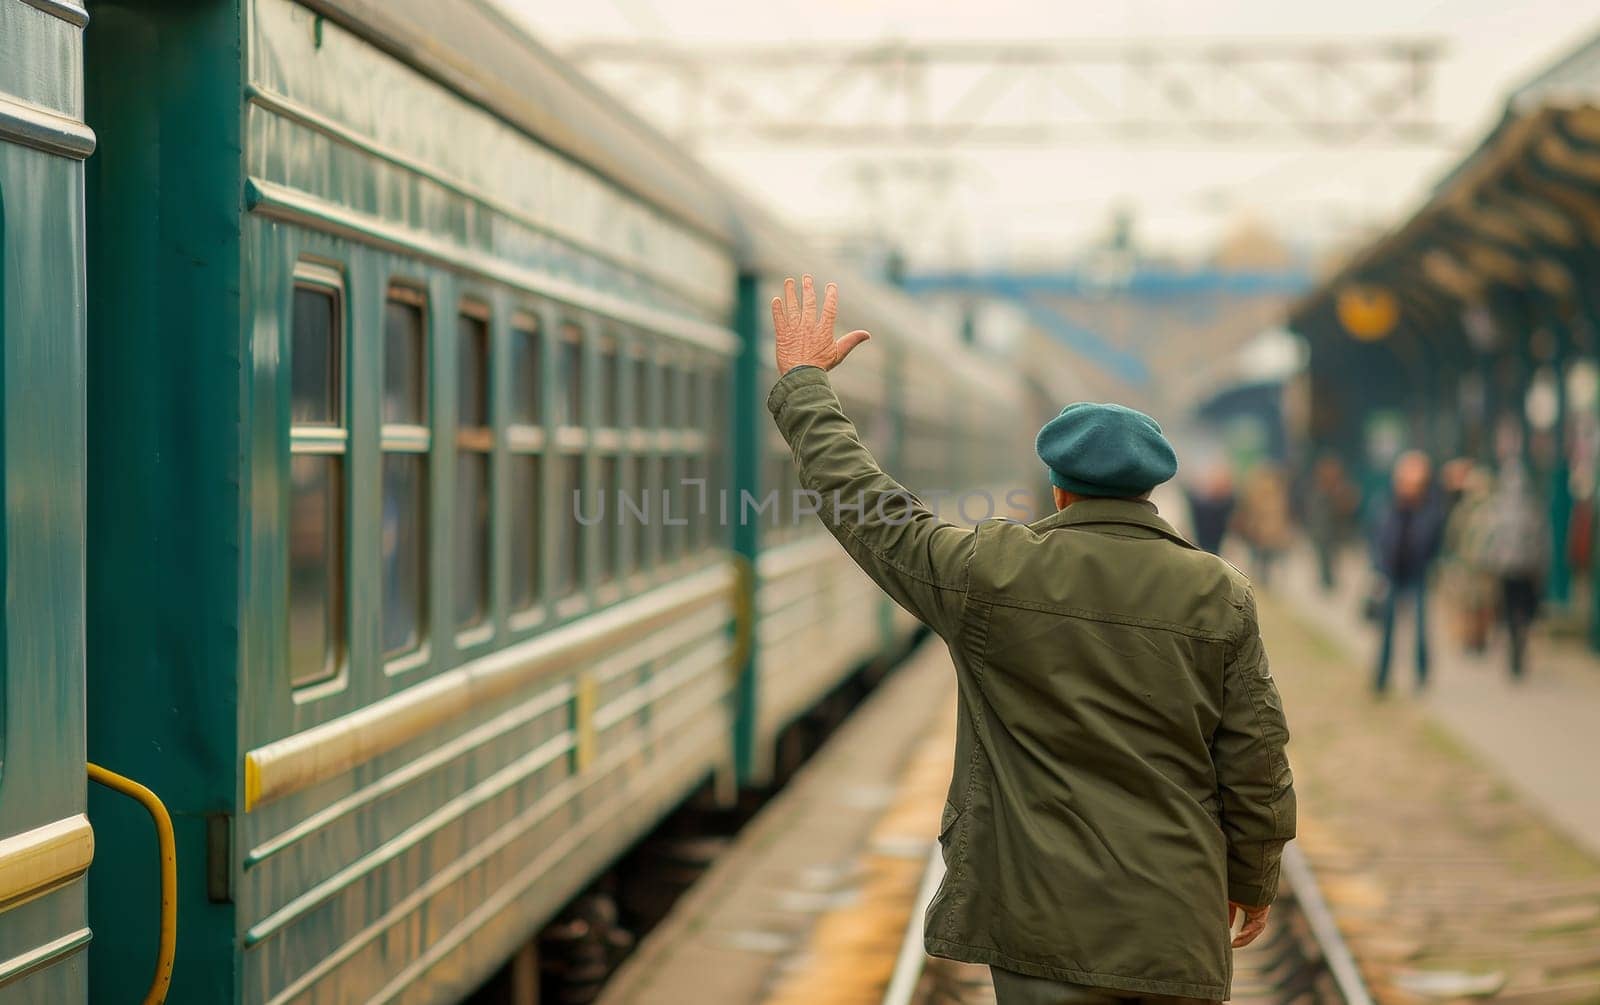 A man in a winter coat and beret waves goodbye to a train. The station bustles with activity as passengers come and go